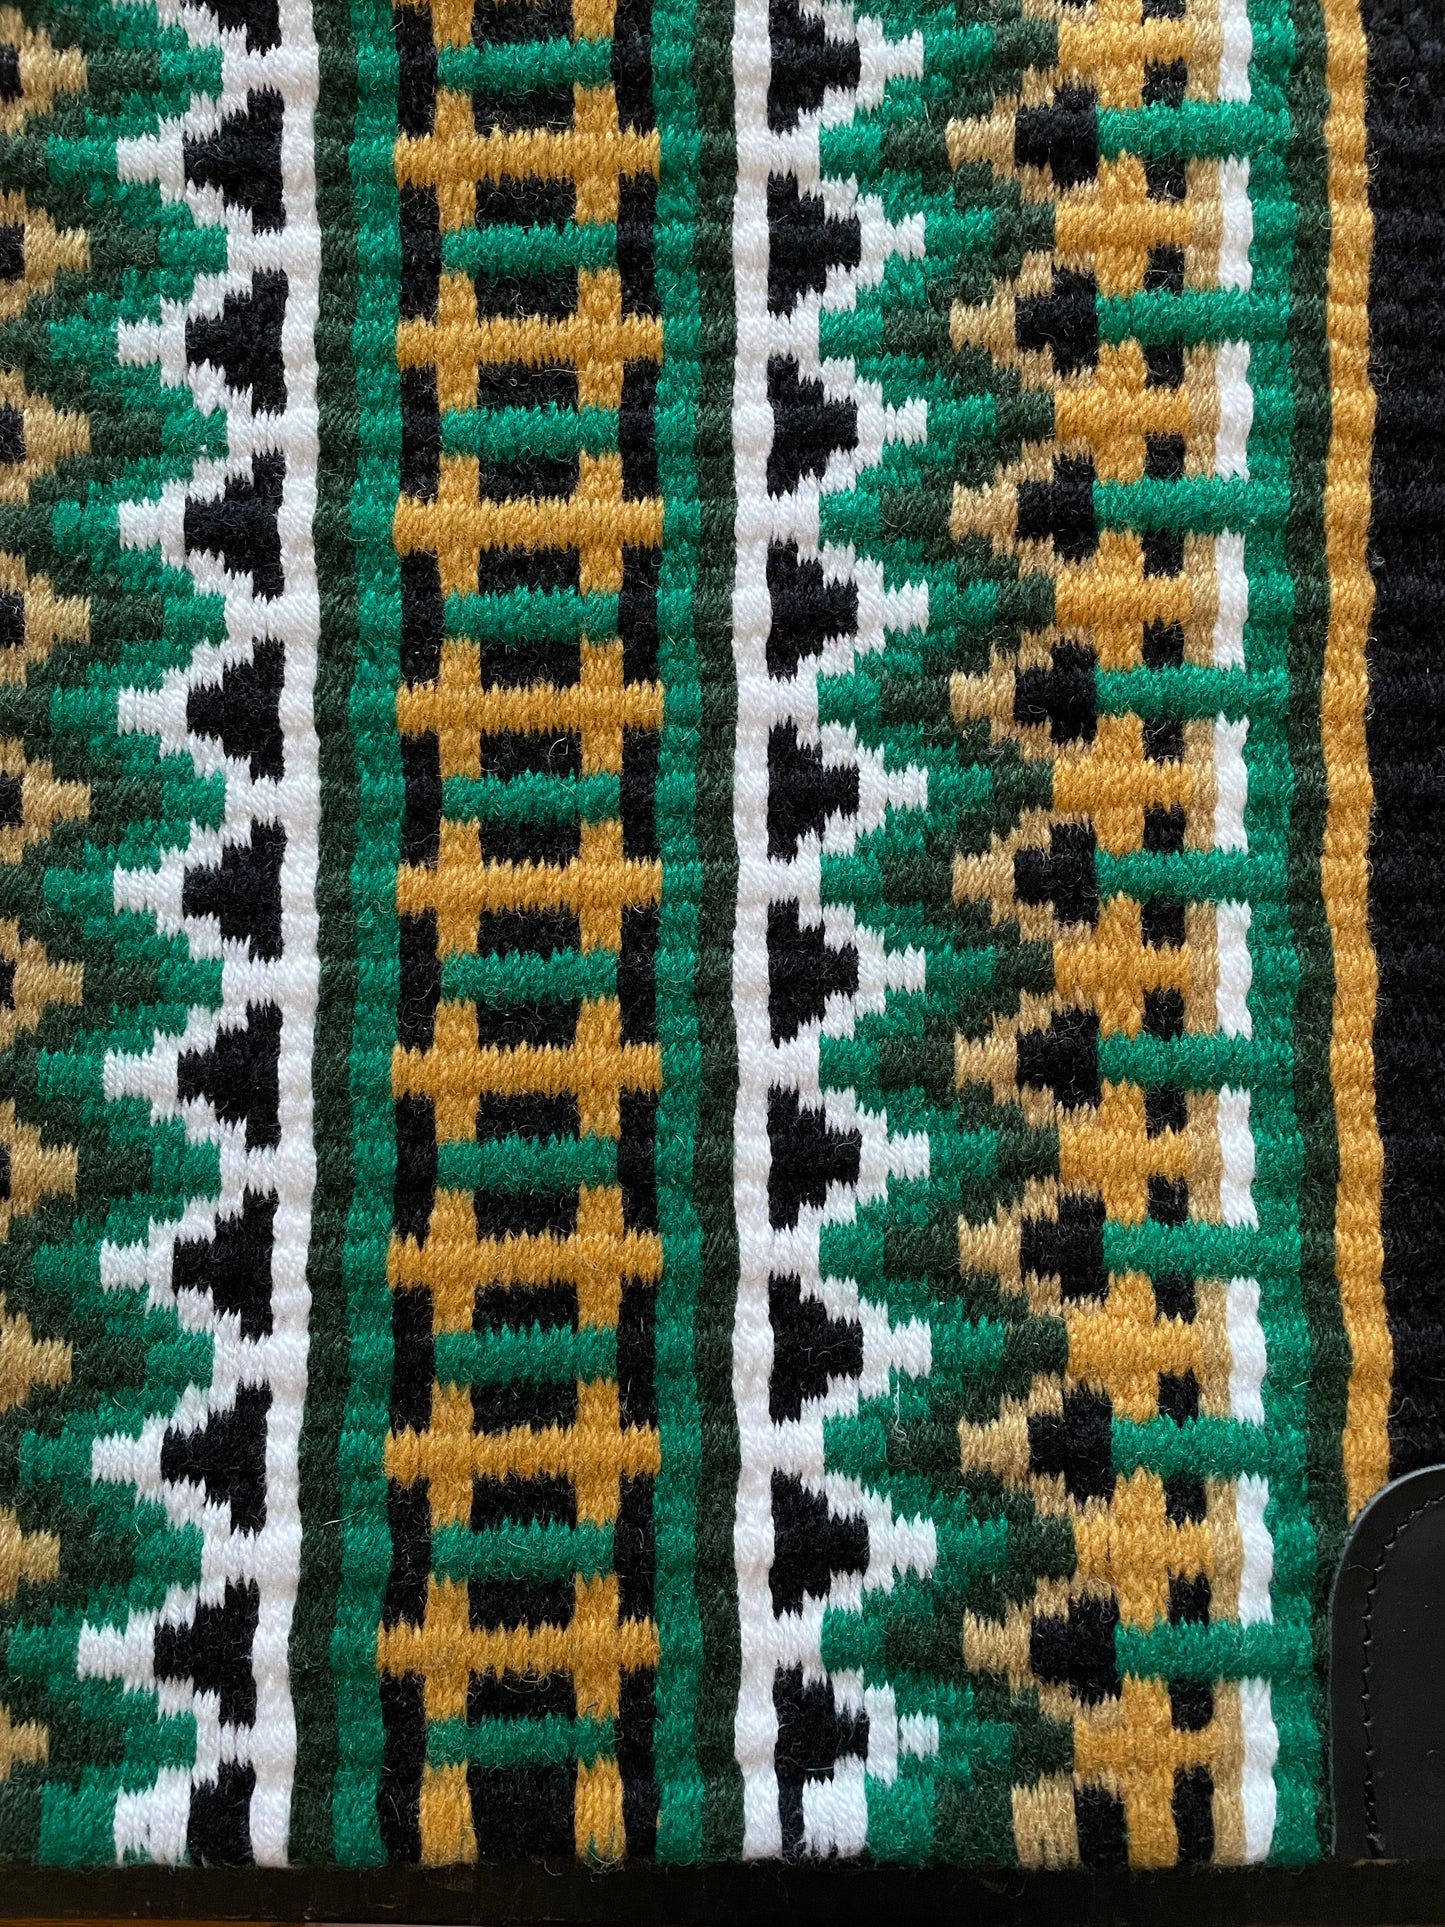 Show Pad 2032 - Black base with Hunter Green, Kelly Green, Gold, Buckskin and Sand Show Pad